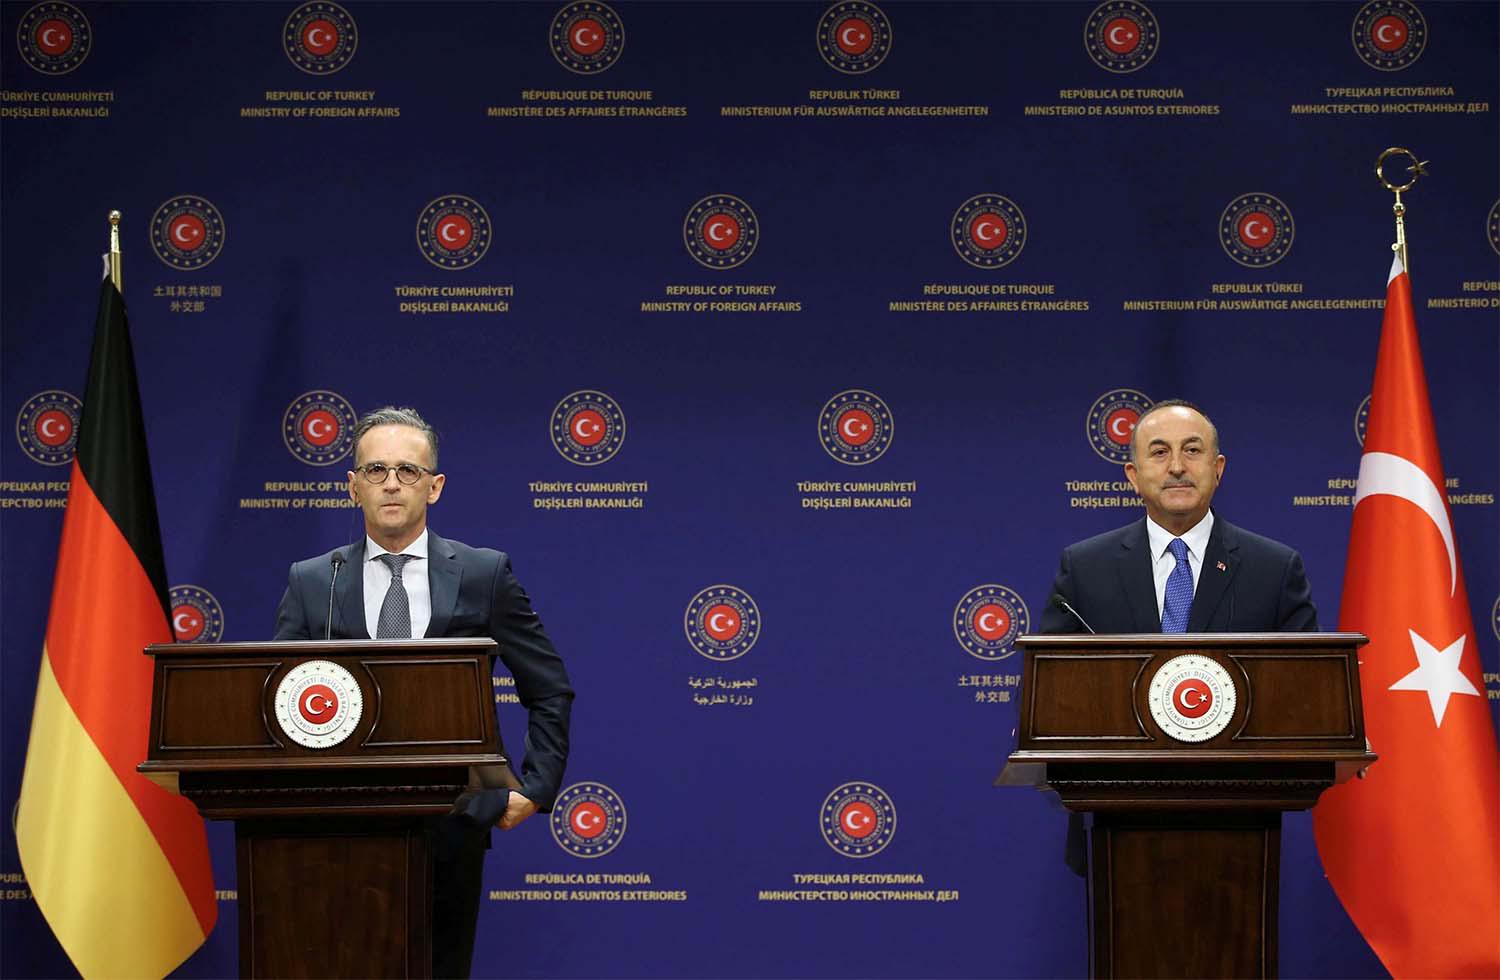 Turkish Foreign Minister Mevlut Cavusoglu and his German counterpart Heiko Maas attend a press conference in Ankara